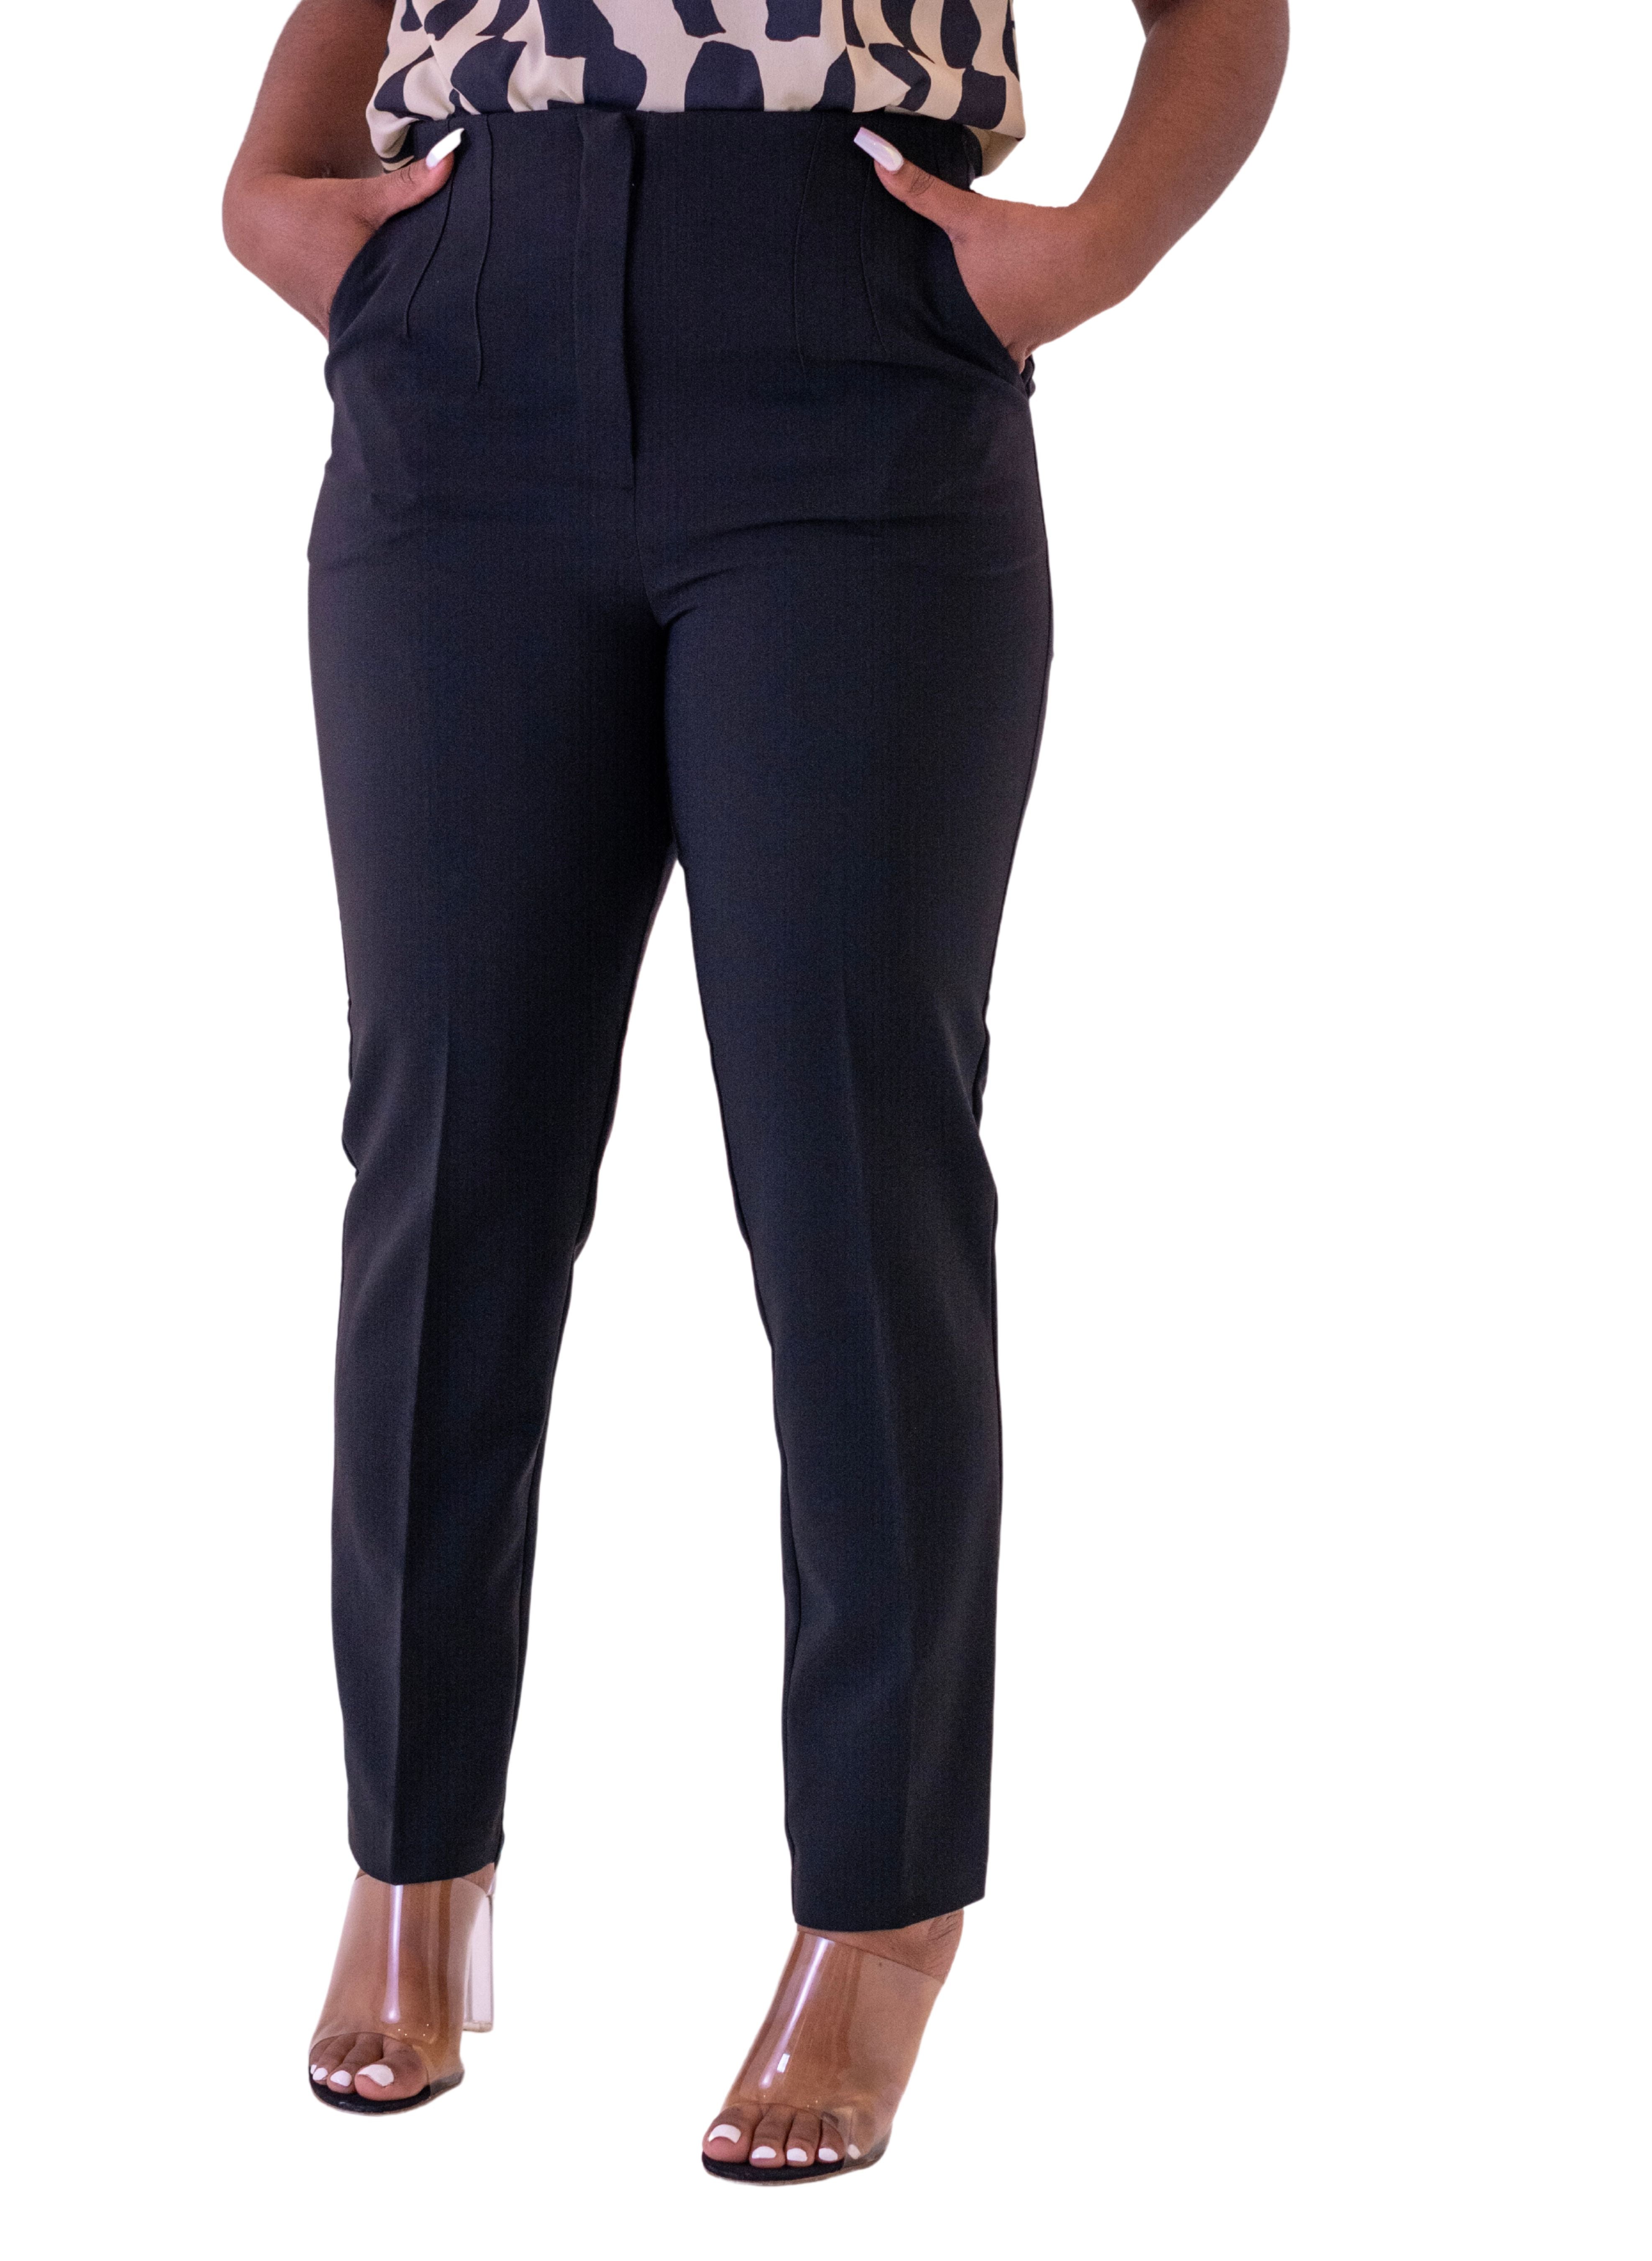 Women's black tailored dress pants with stretch fit and pockets